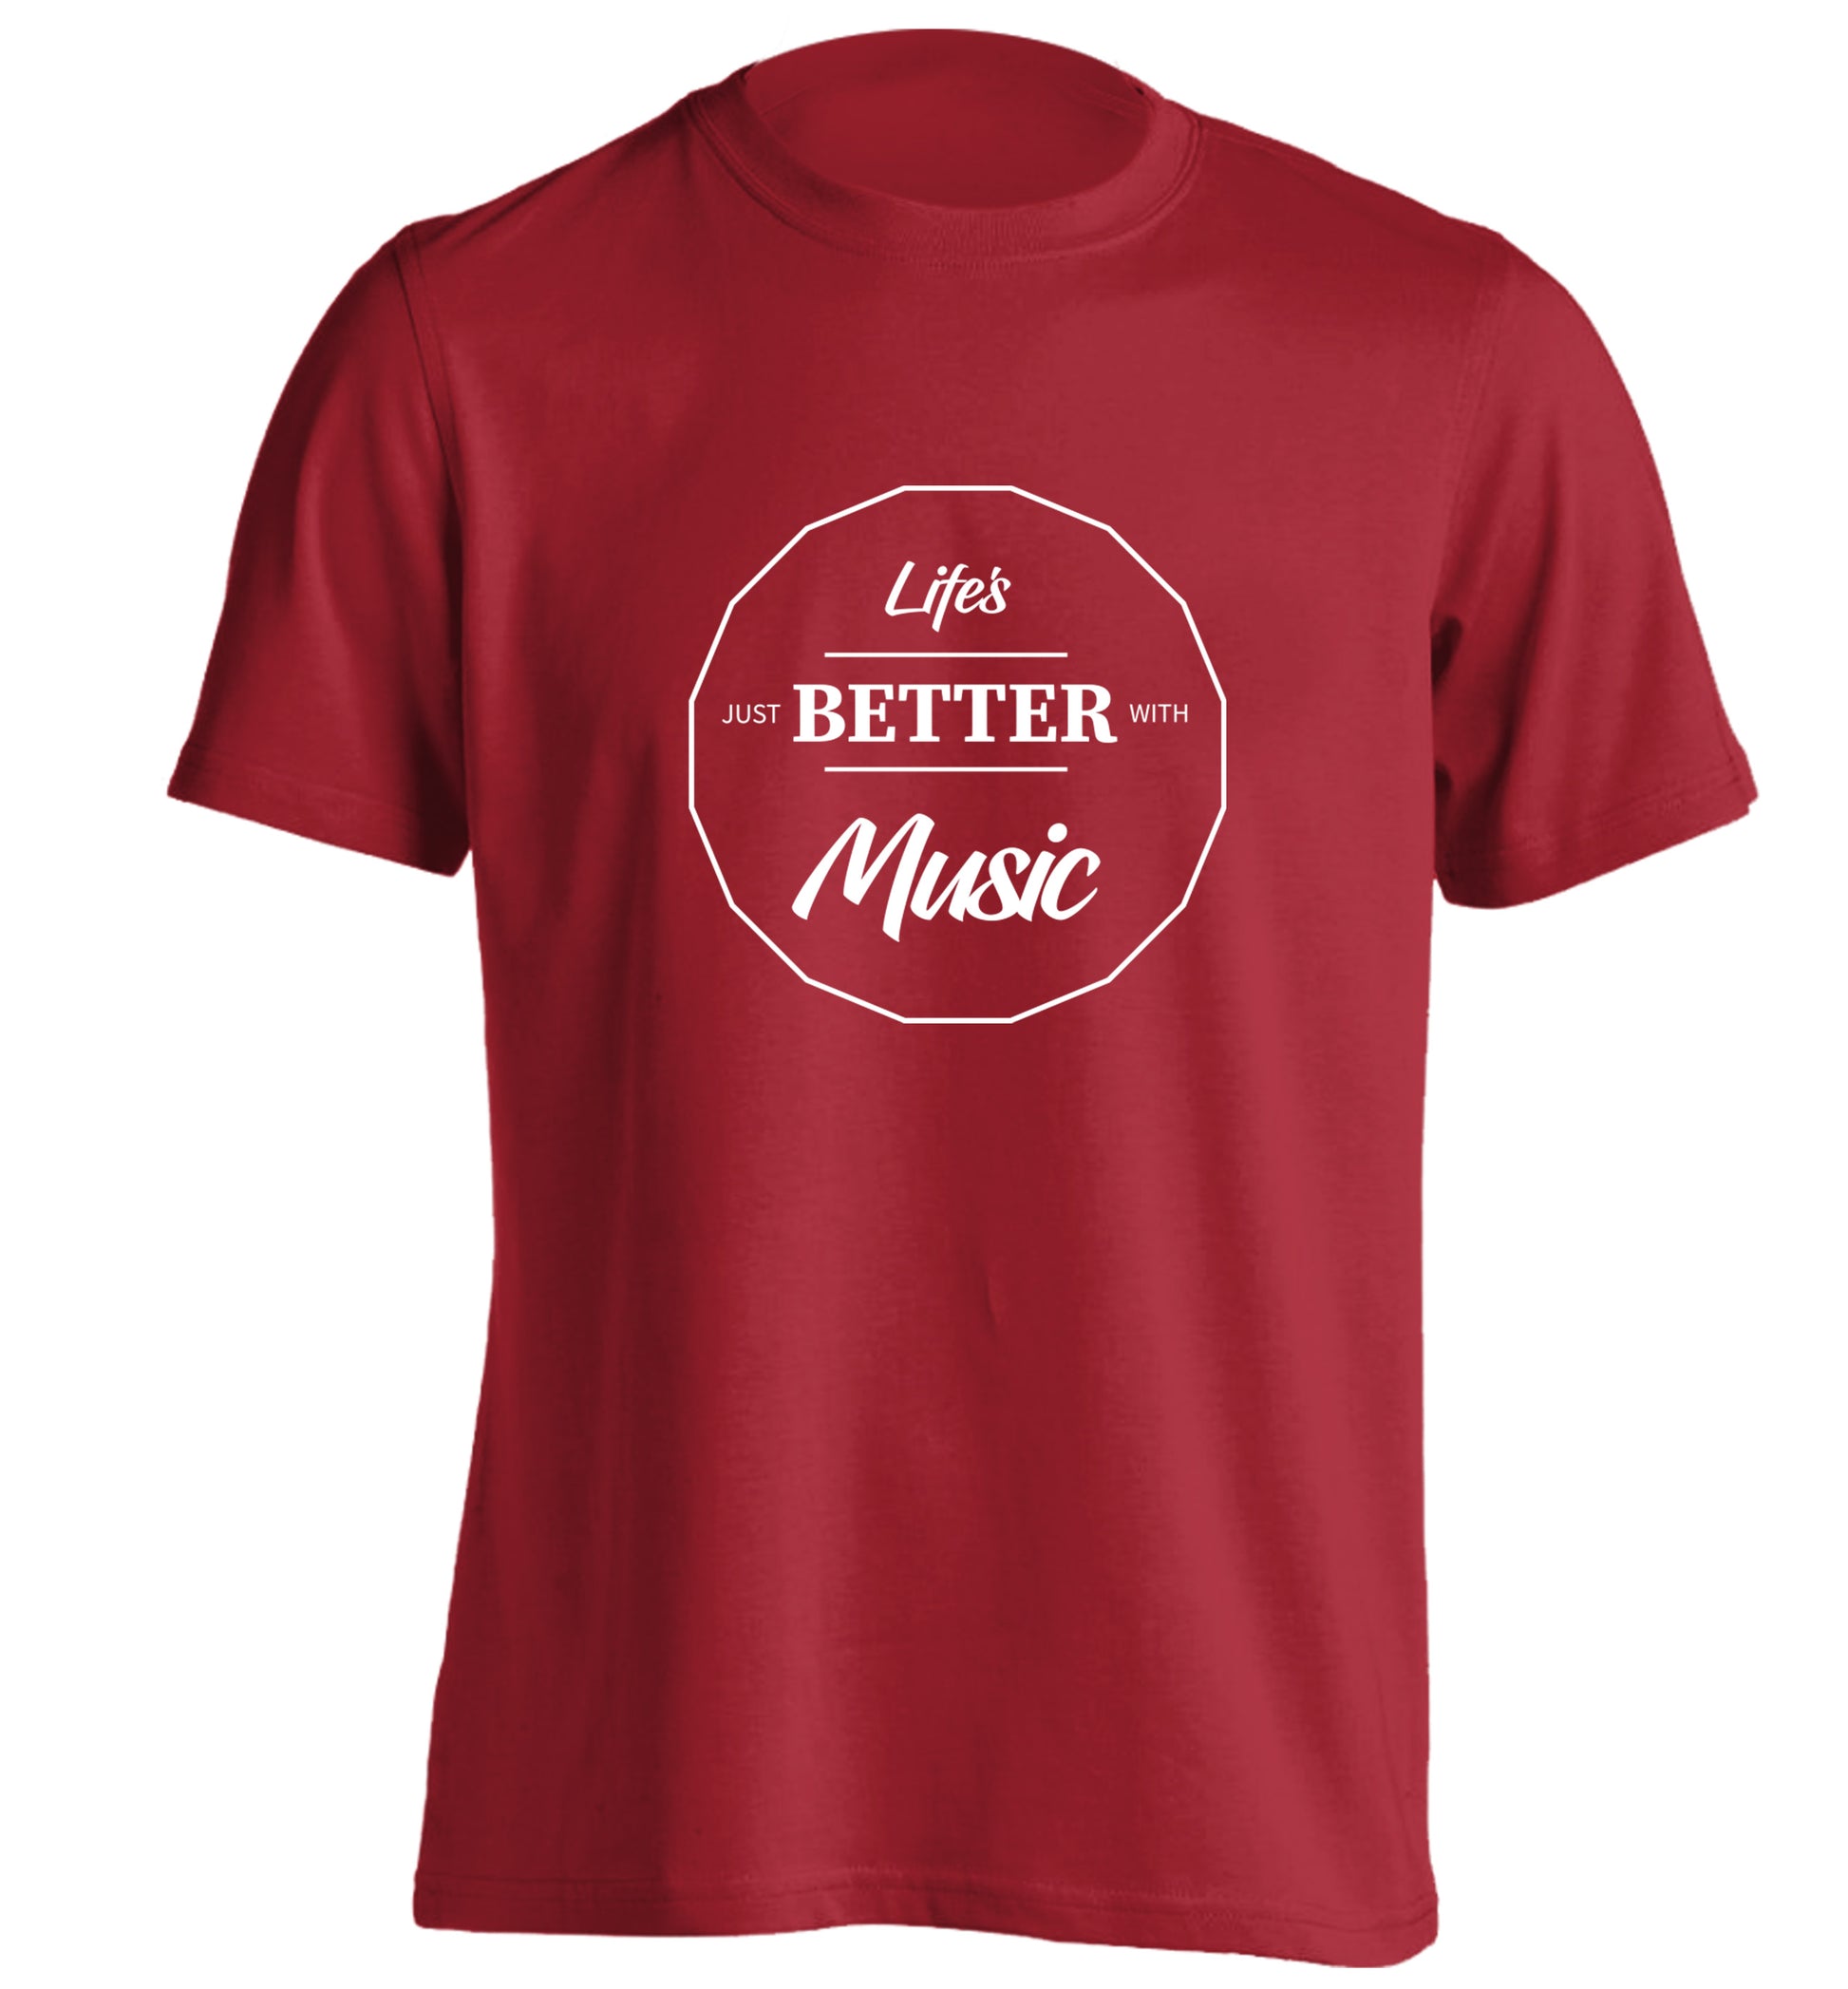 Life is Better With Music adults unisex red Tshirt 2XL